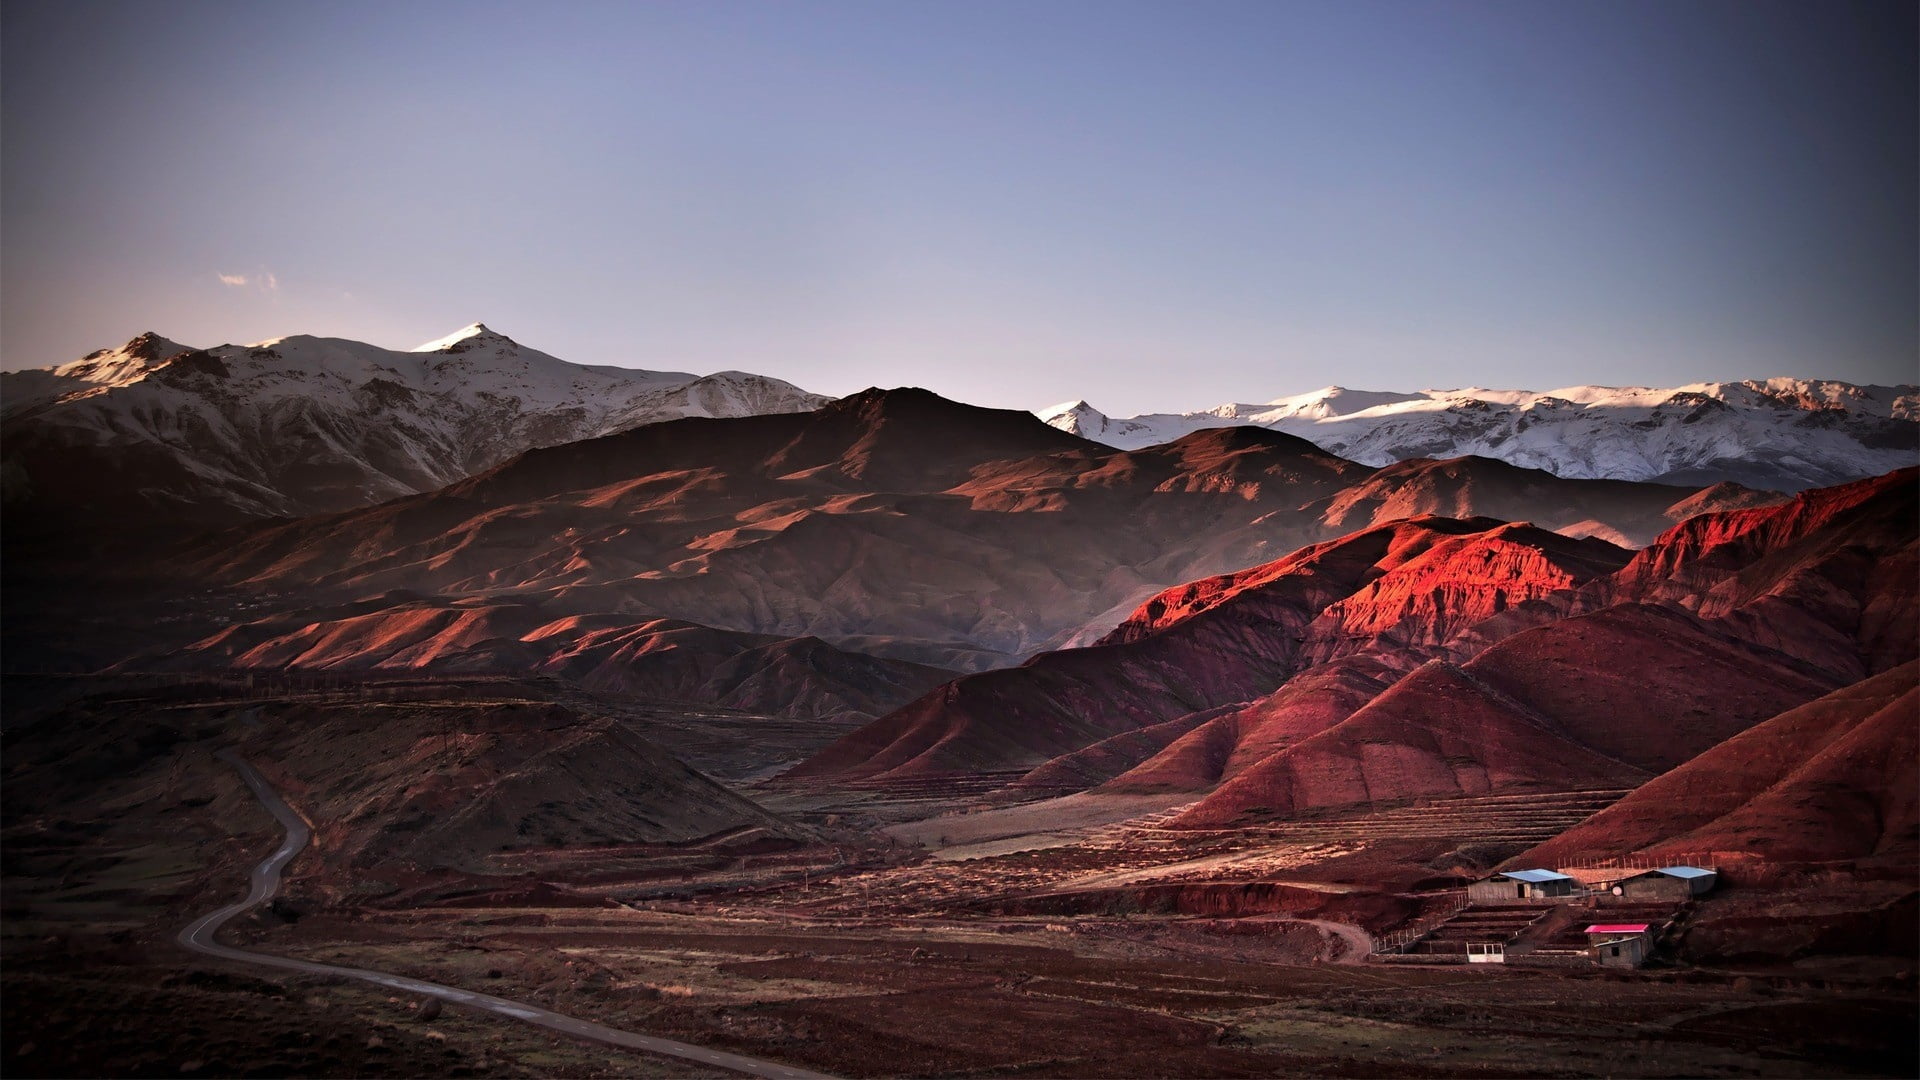 red mountains, sky, nature, distance, himalayas, landscape, scenics